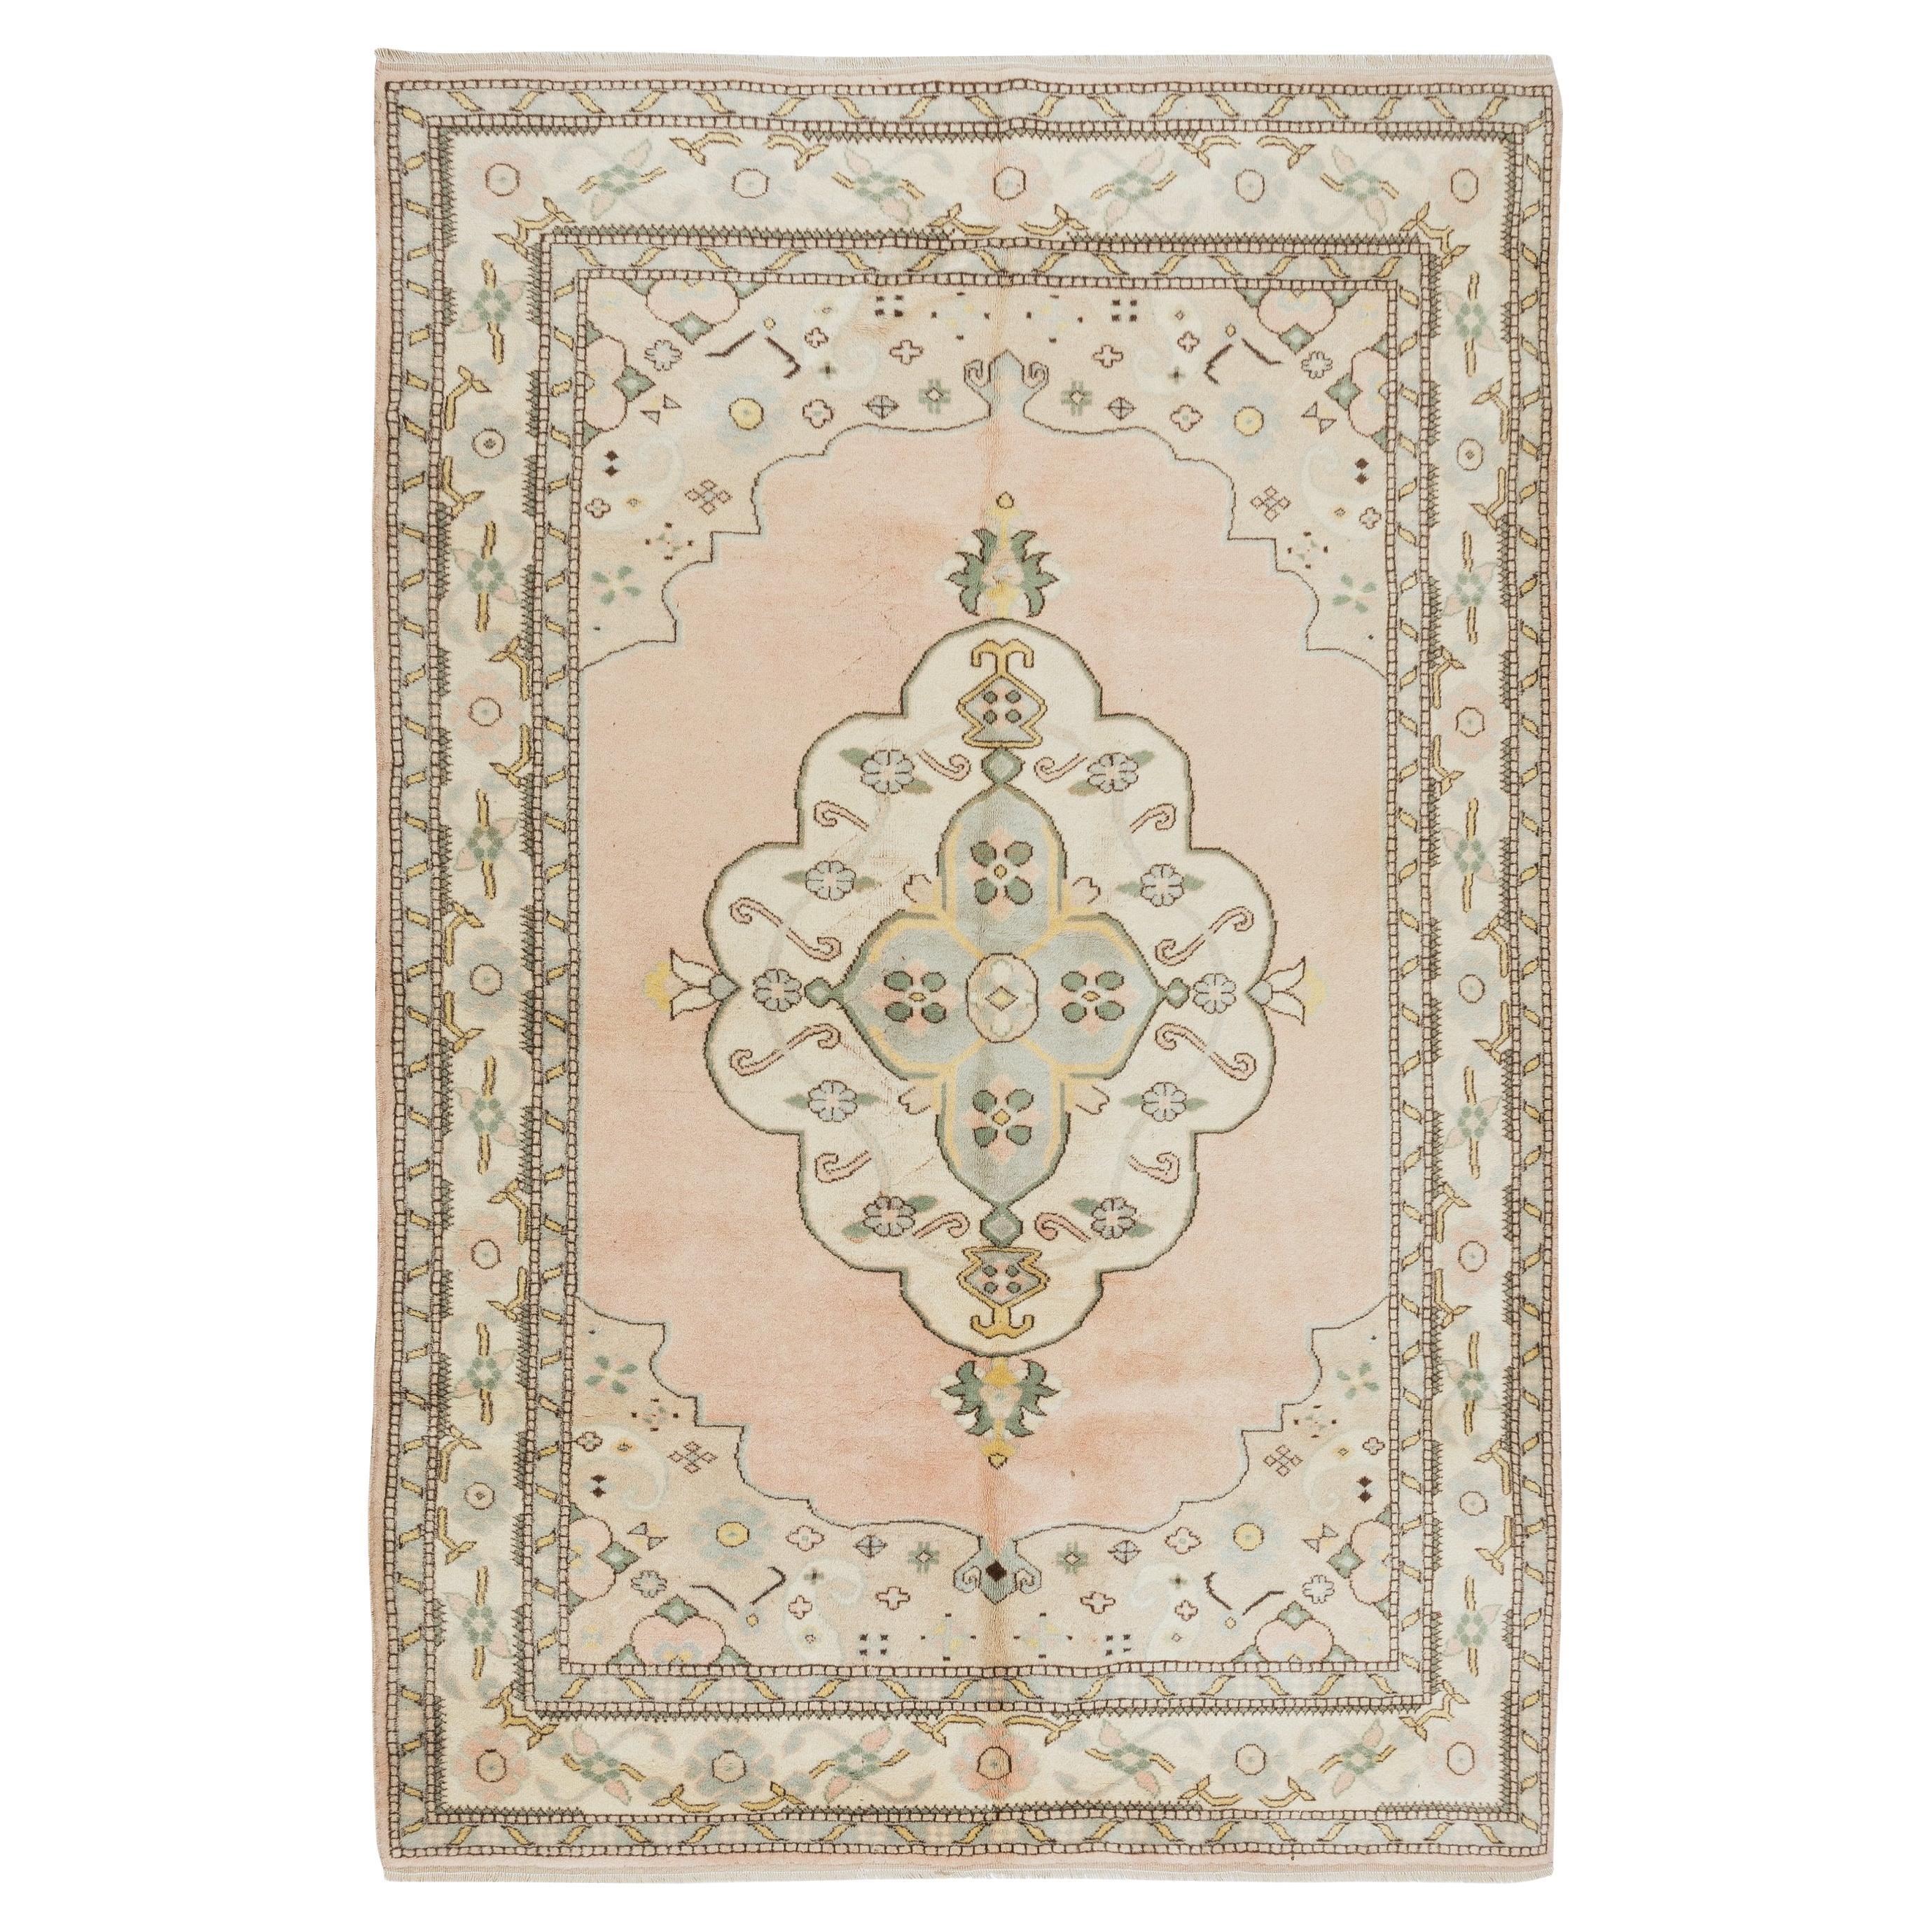 5.6x8.3 Ft Modern Hand Knotted Turkish Area Rug with Medallion Design, 100% Wool